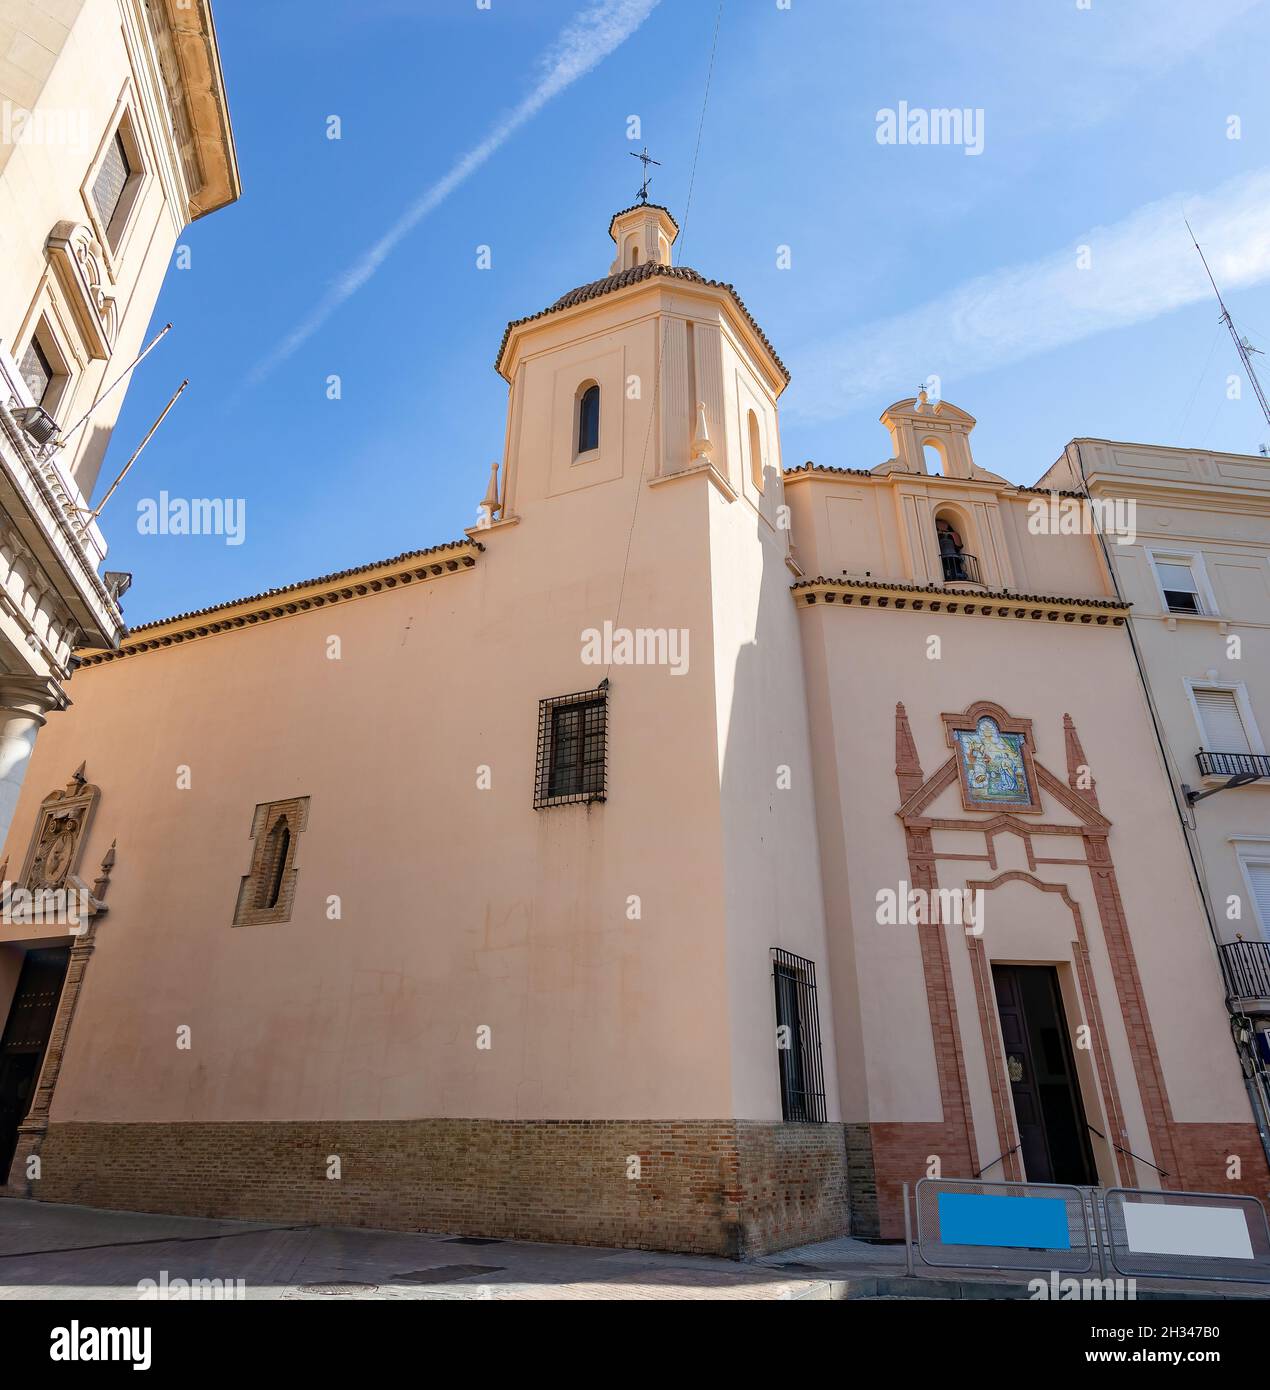 Monastery of Santa María de Gracia Madres Agustinas. The Convent  is a Catholic convent of Augustinian nuns located in the center of the city of Huelv Stock Photo